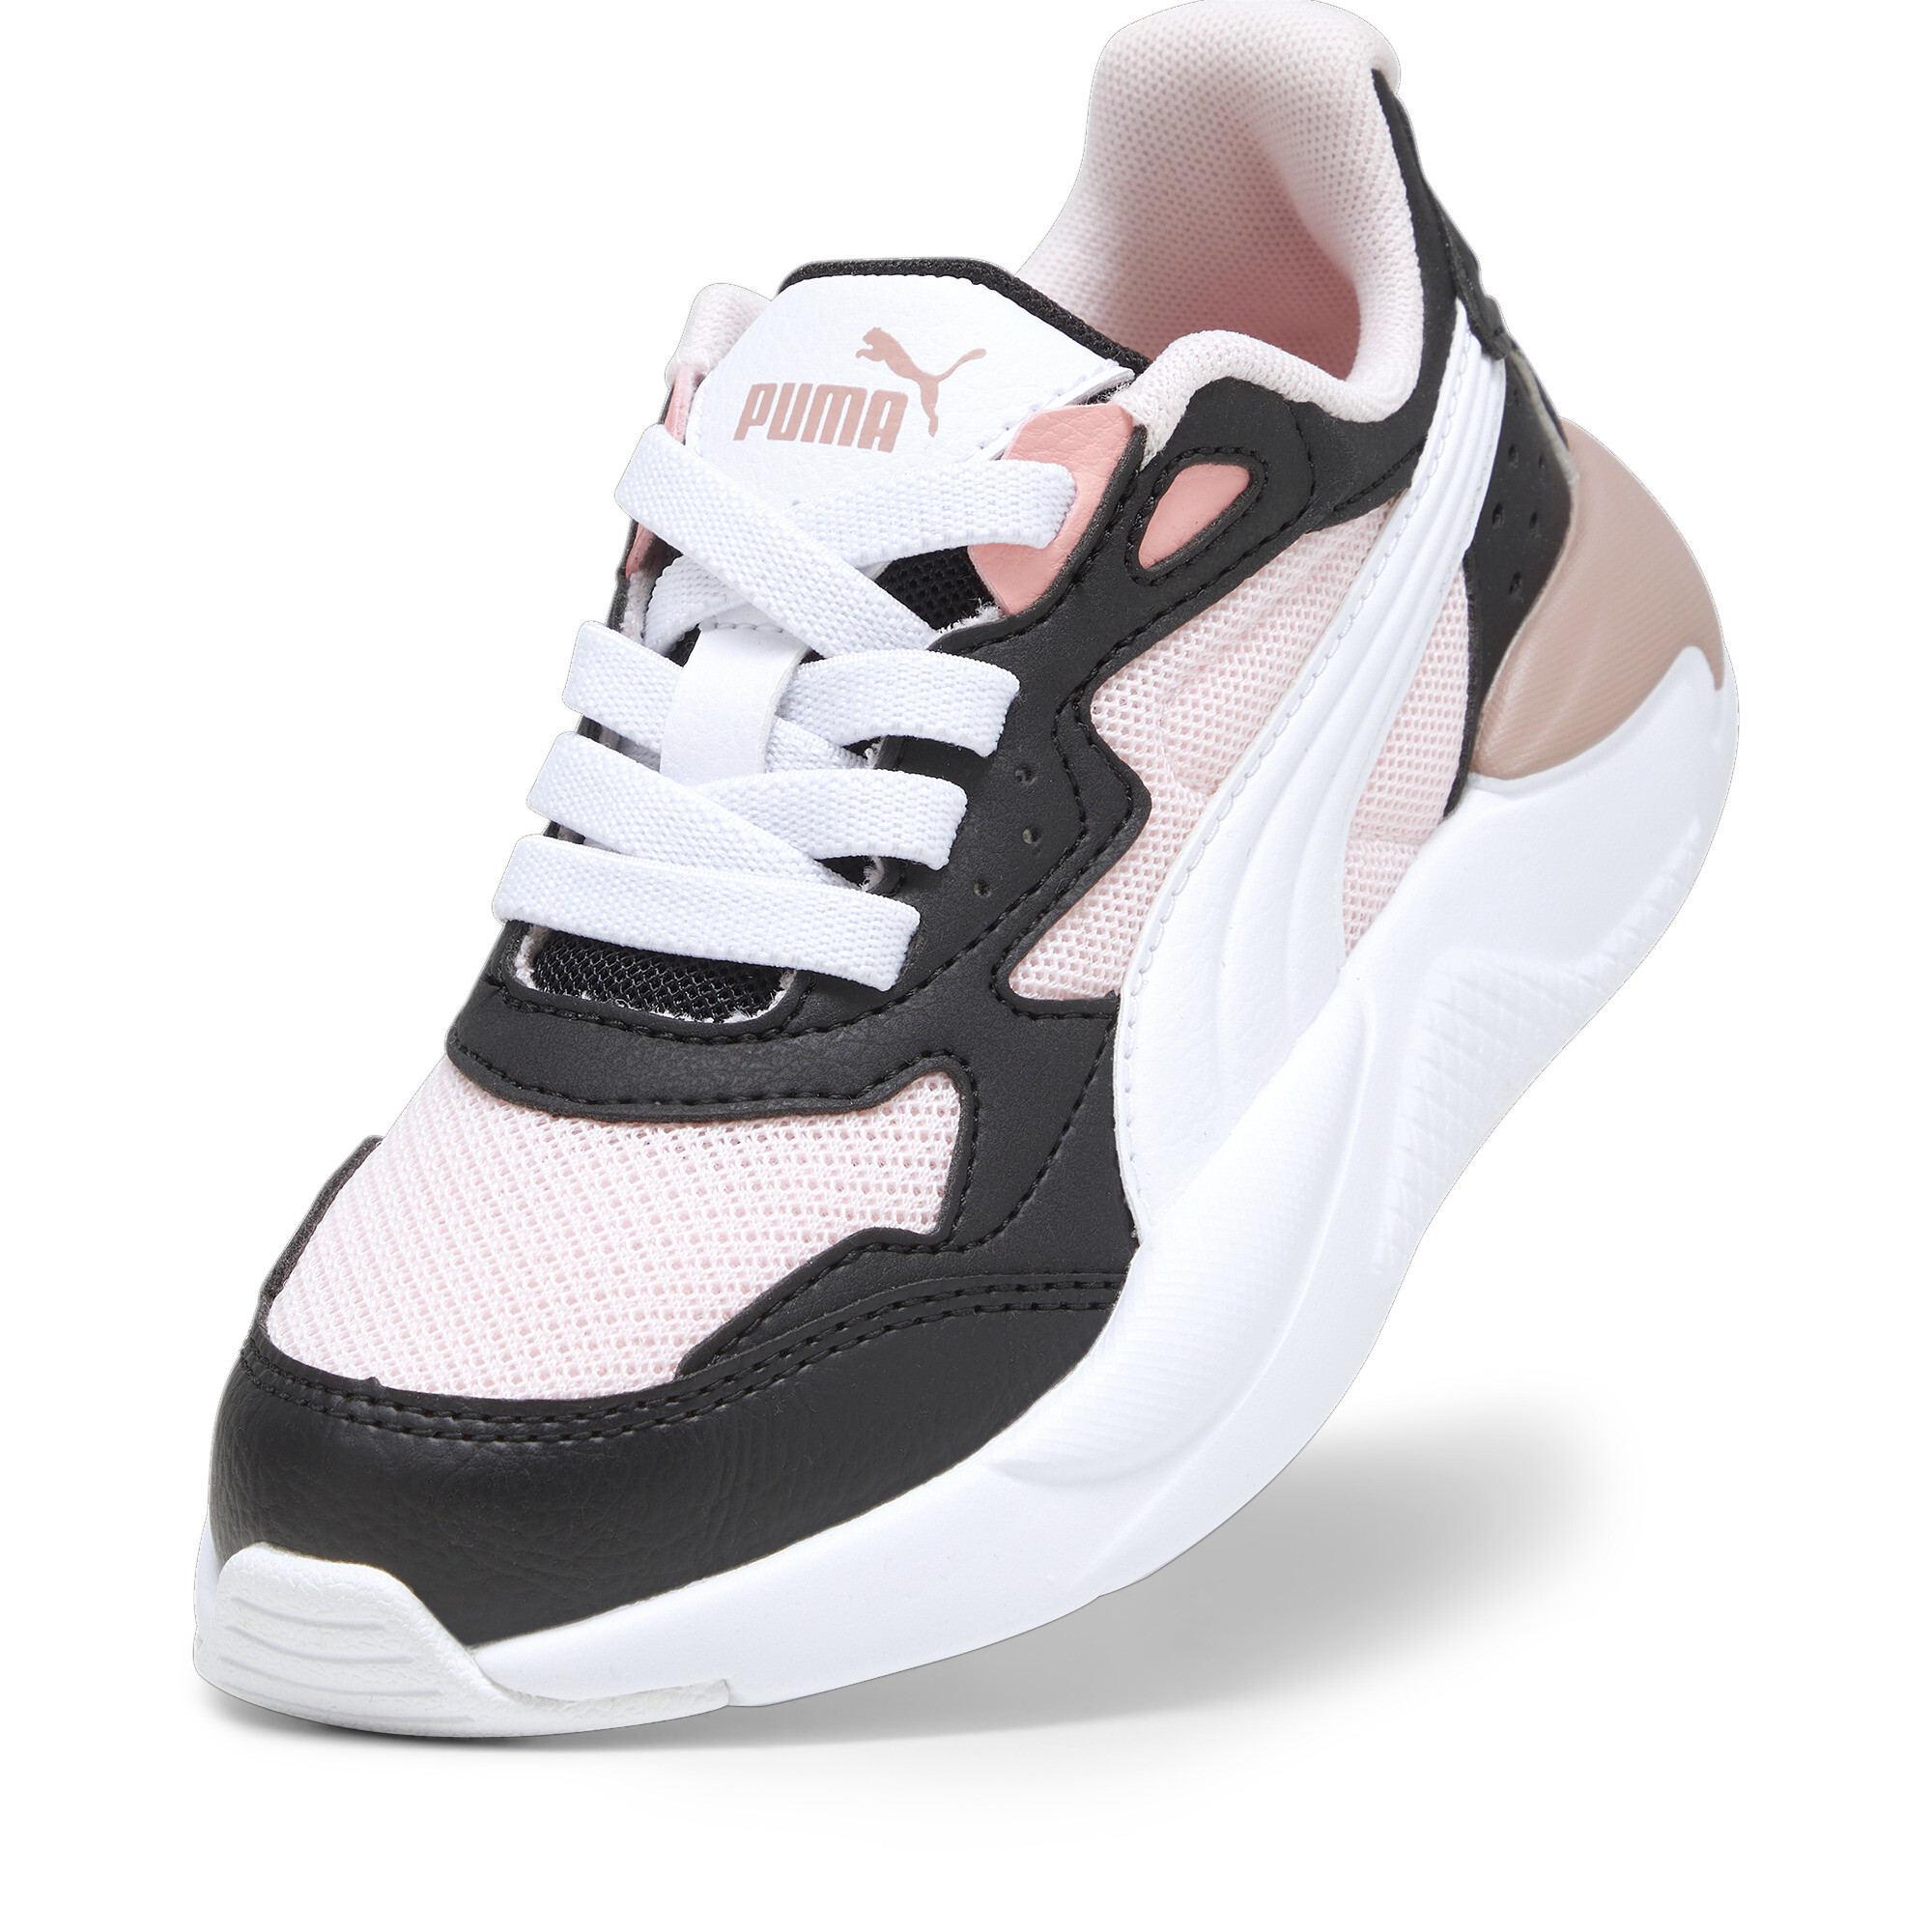 Puma X-Ray Speed AC Kids' Trainers, Pink, Size 27.5, Shoes